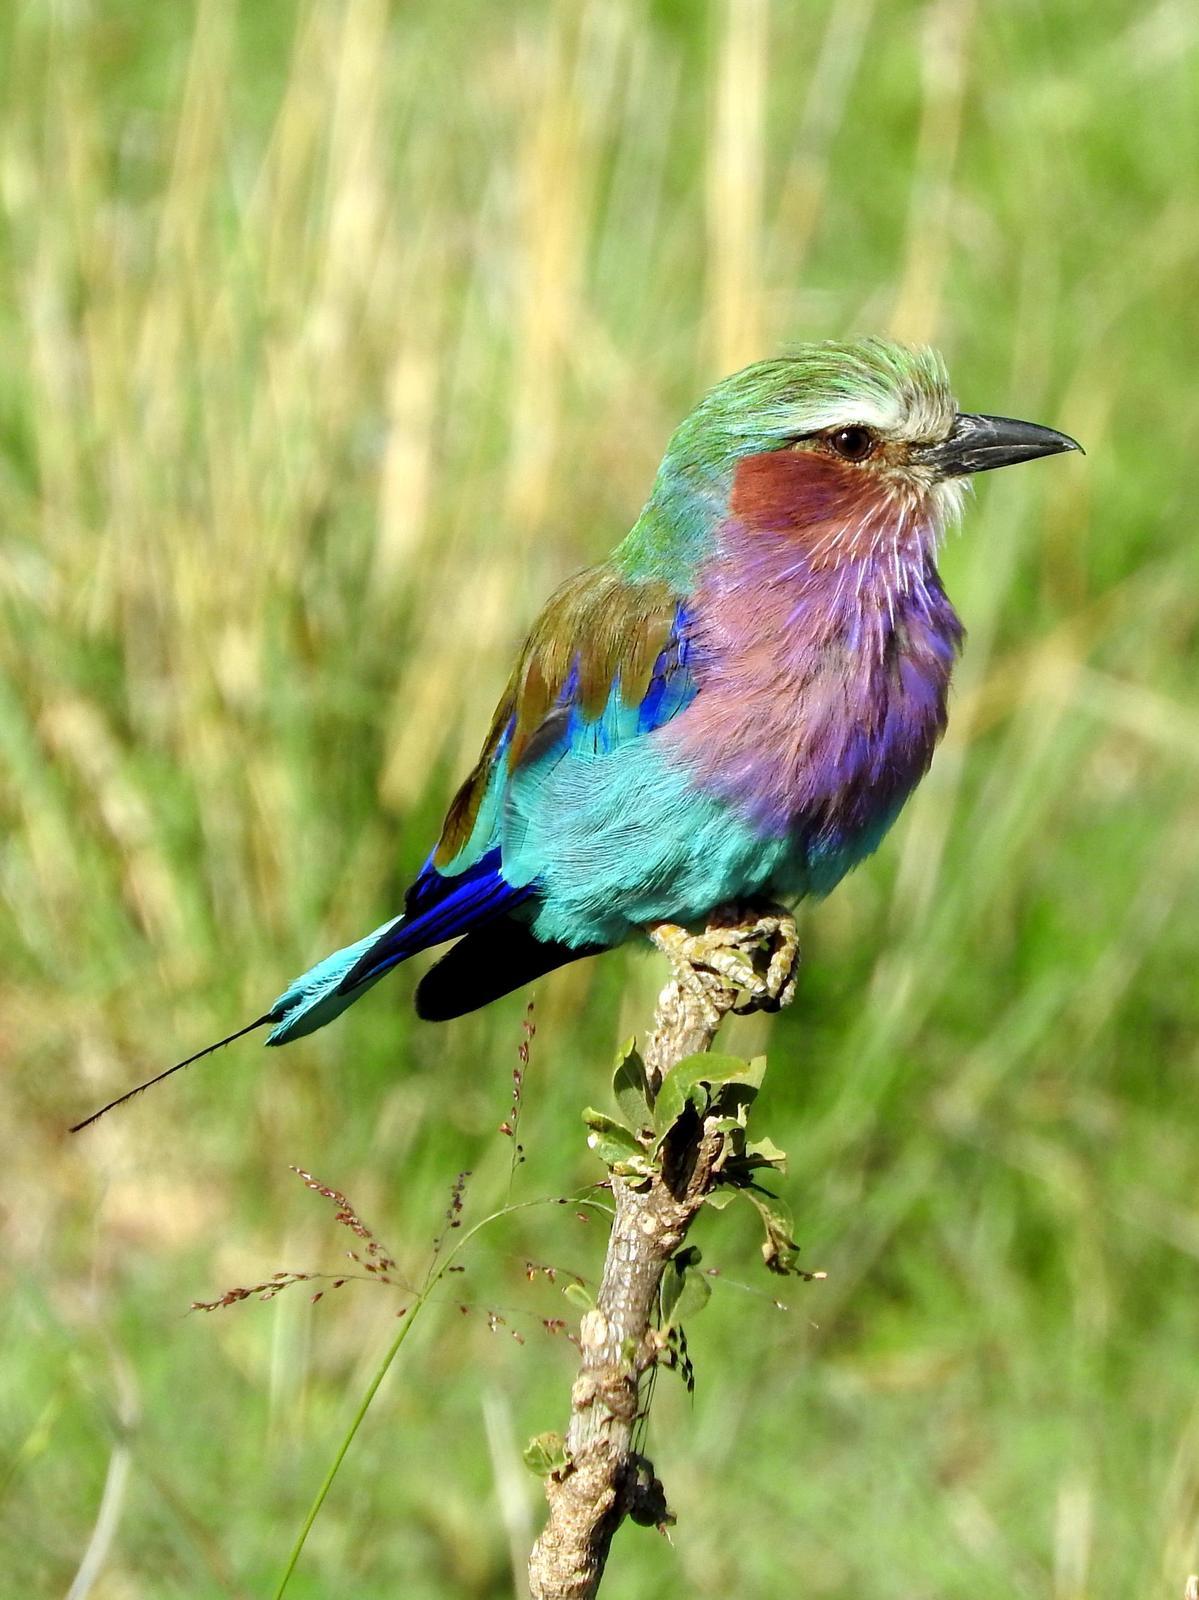 Lilac-breasted Roller Photo by Todd A. Watkins